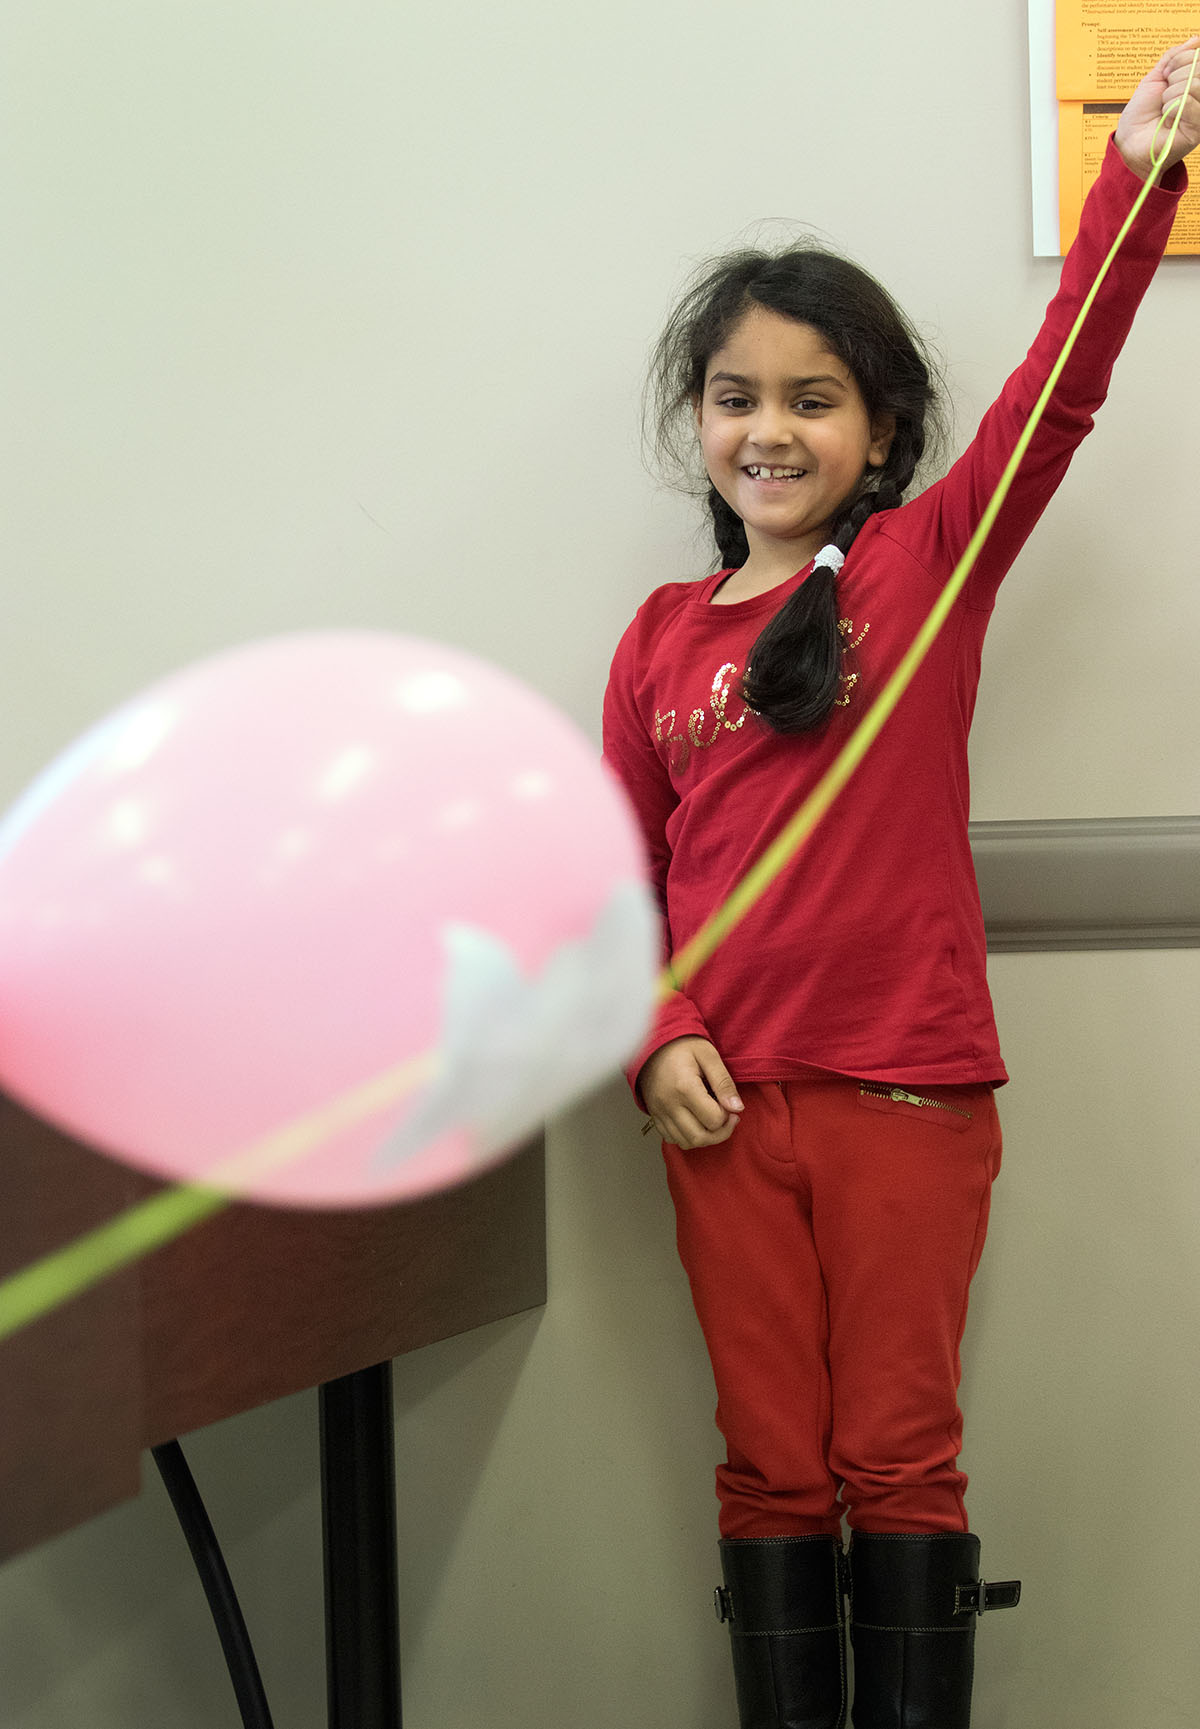 Aanya Gupta races a balloon down a string in Fun with Physics.